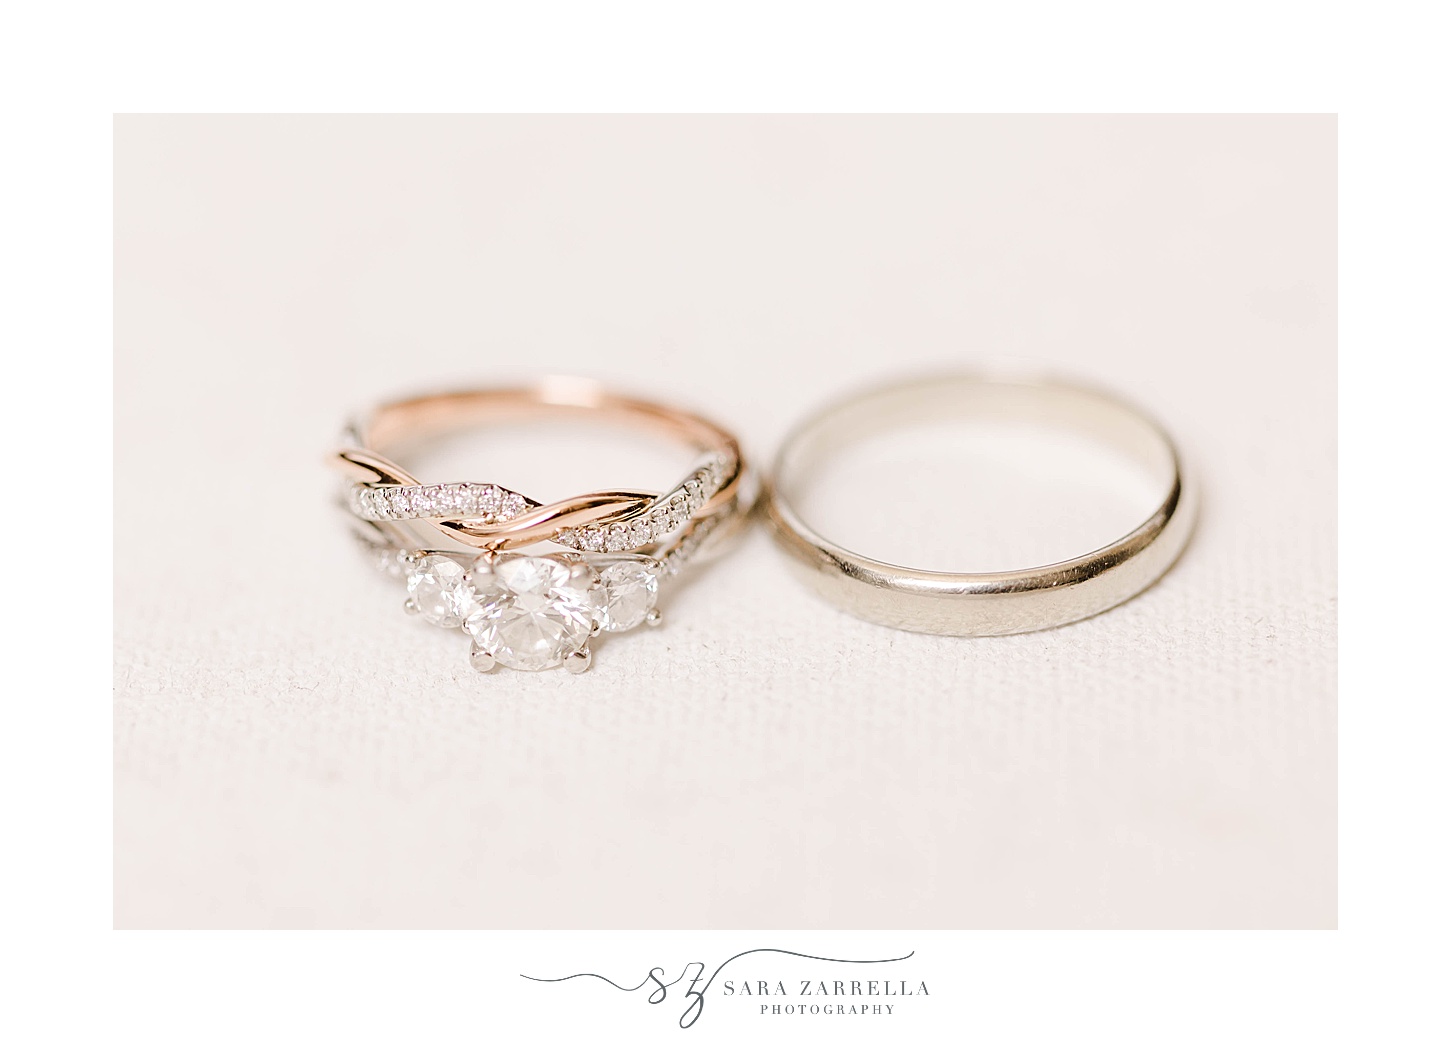 gold wedding bands lay together on ivory backdrop 